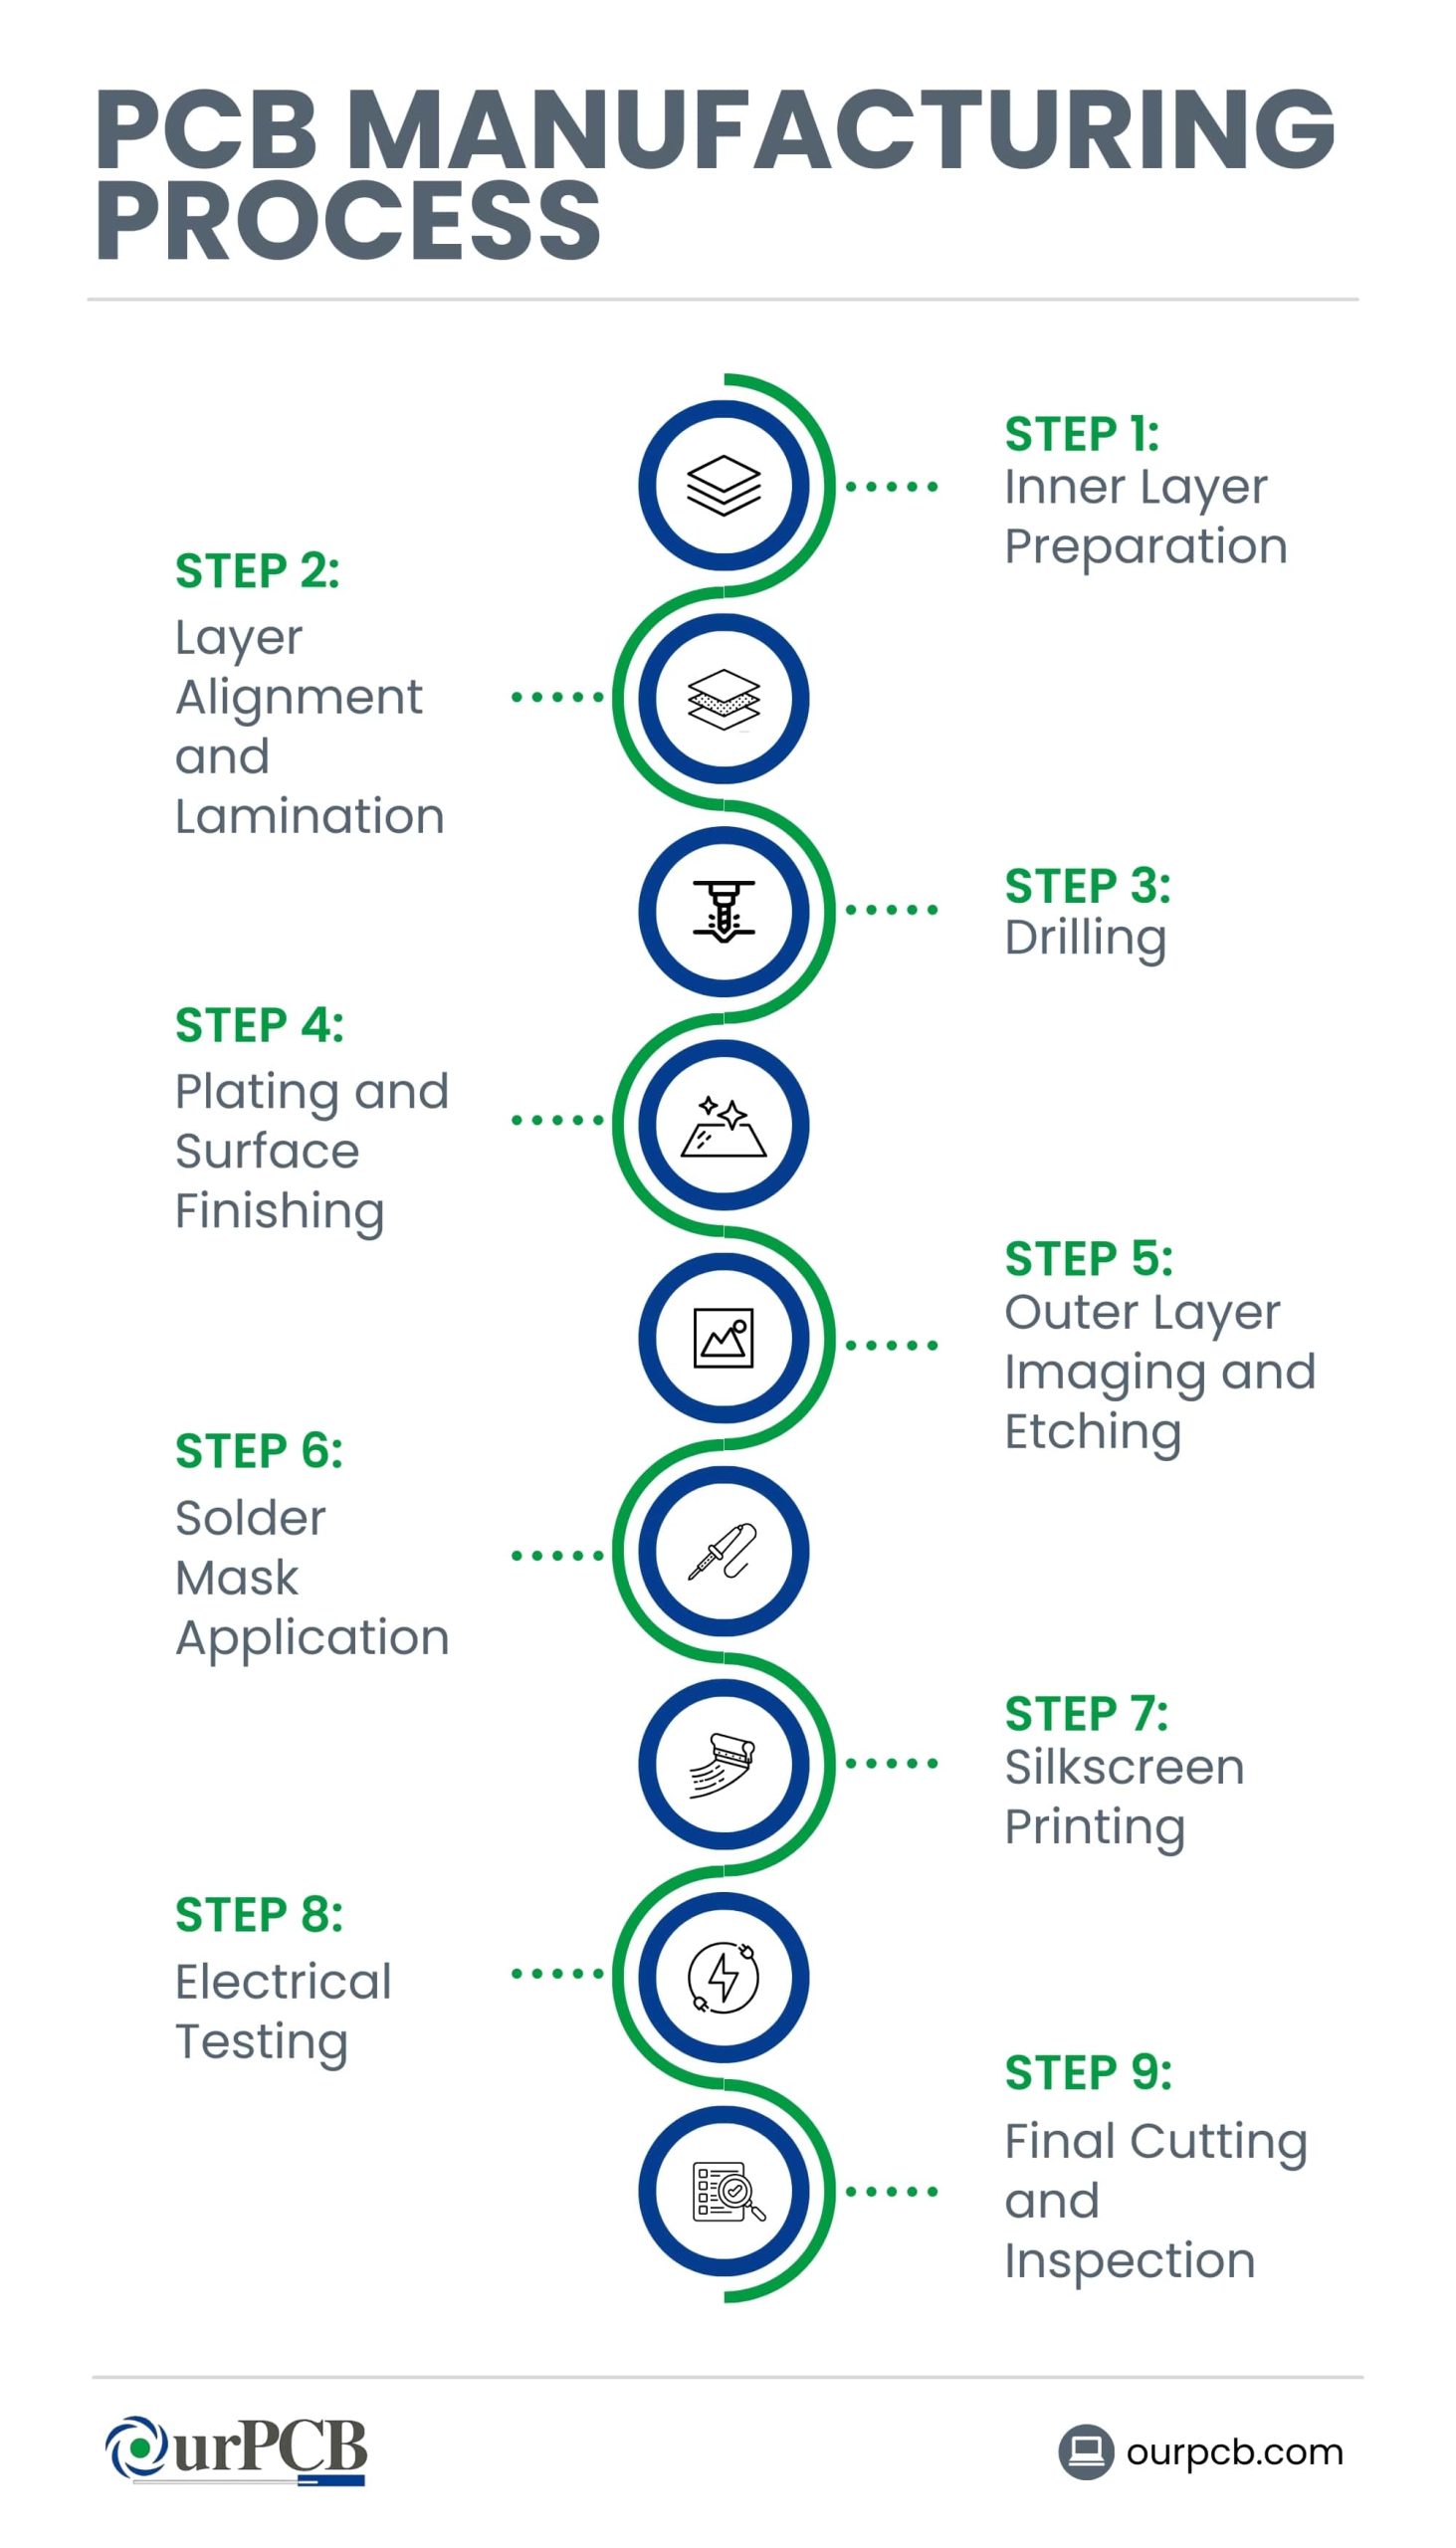 Steps in the PCB Manufacturing Process